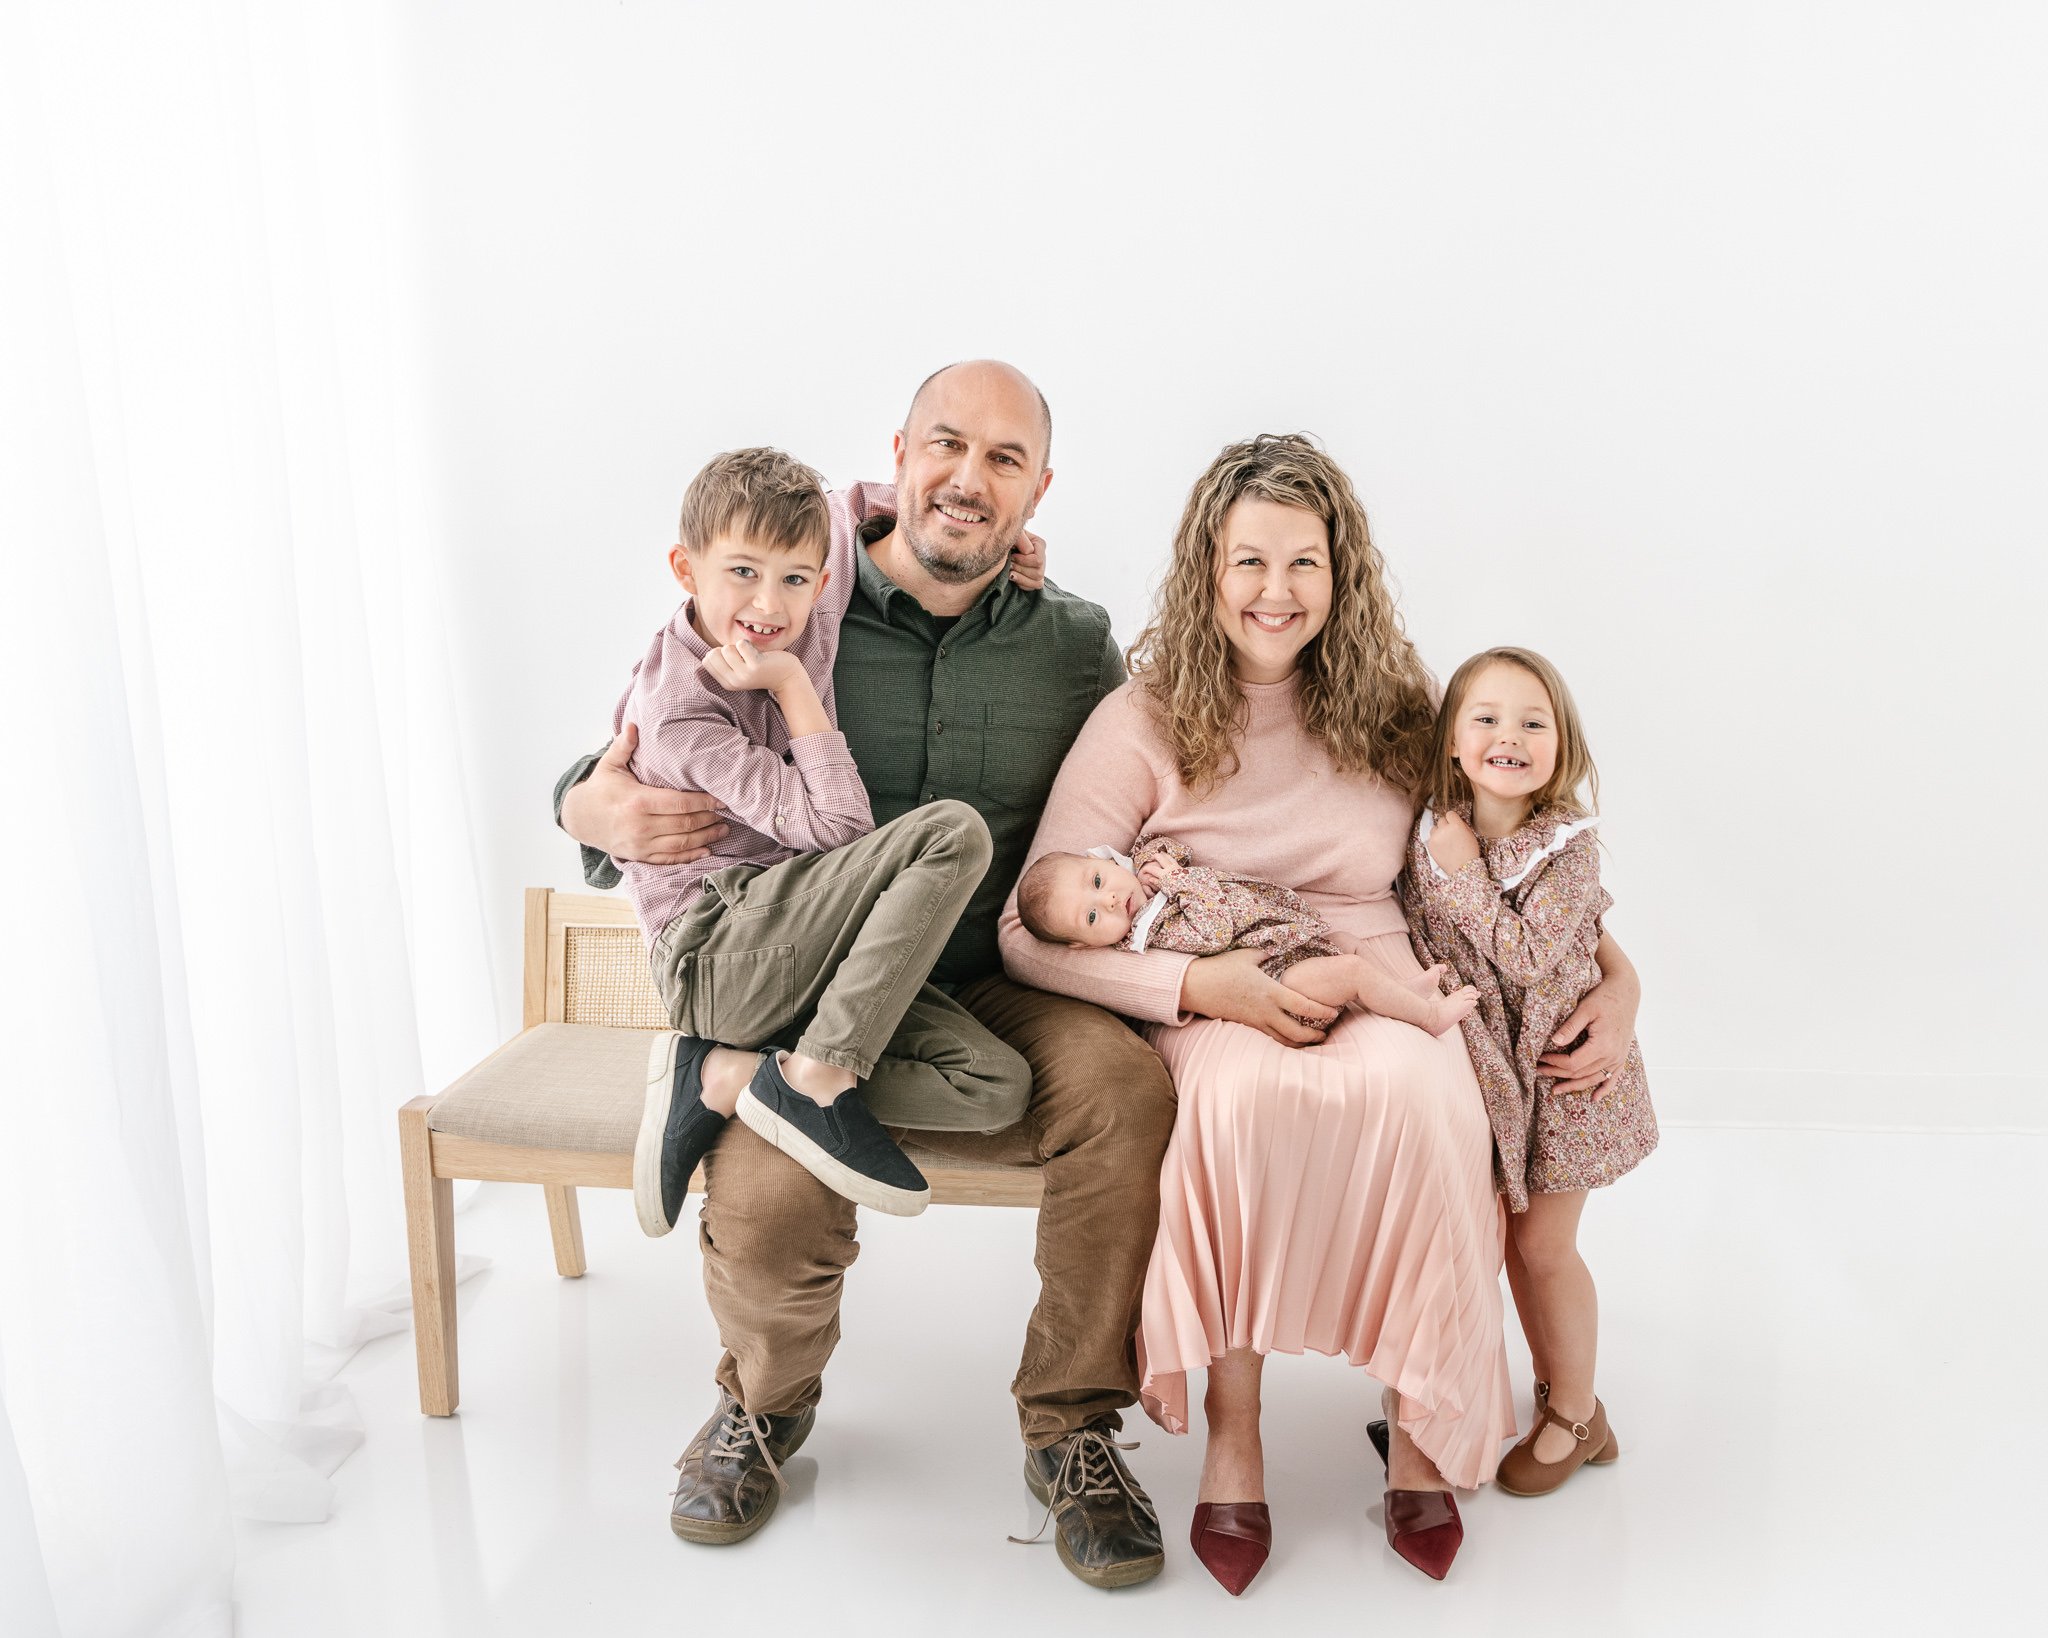  Family portrait with two little girls and a son by Nicole Hawkins Photography. newborn baby with family family of 5 #NicoleHawkinsPhotography #NicoleHawkinsFamily #Newborns #MaplewoodNJ #studiofamilyportraits #modernfamilyportraits 